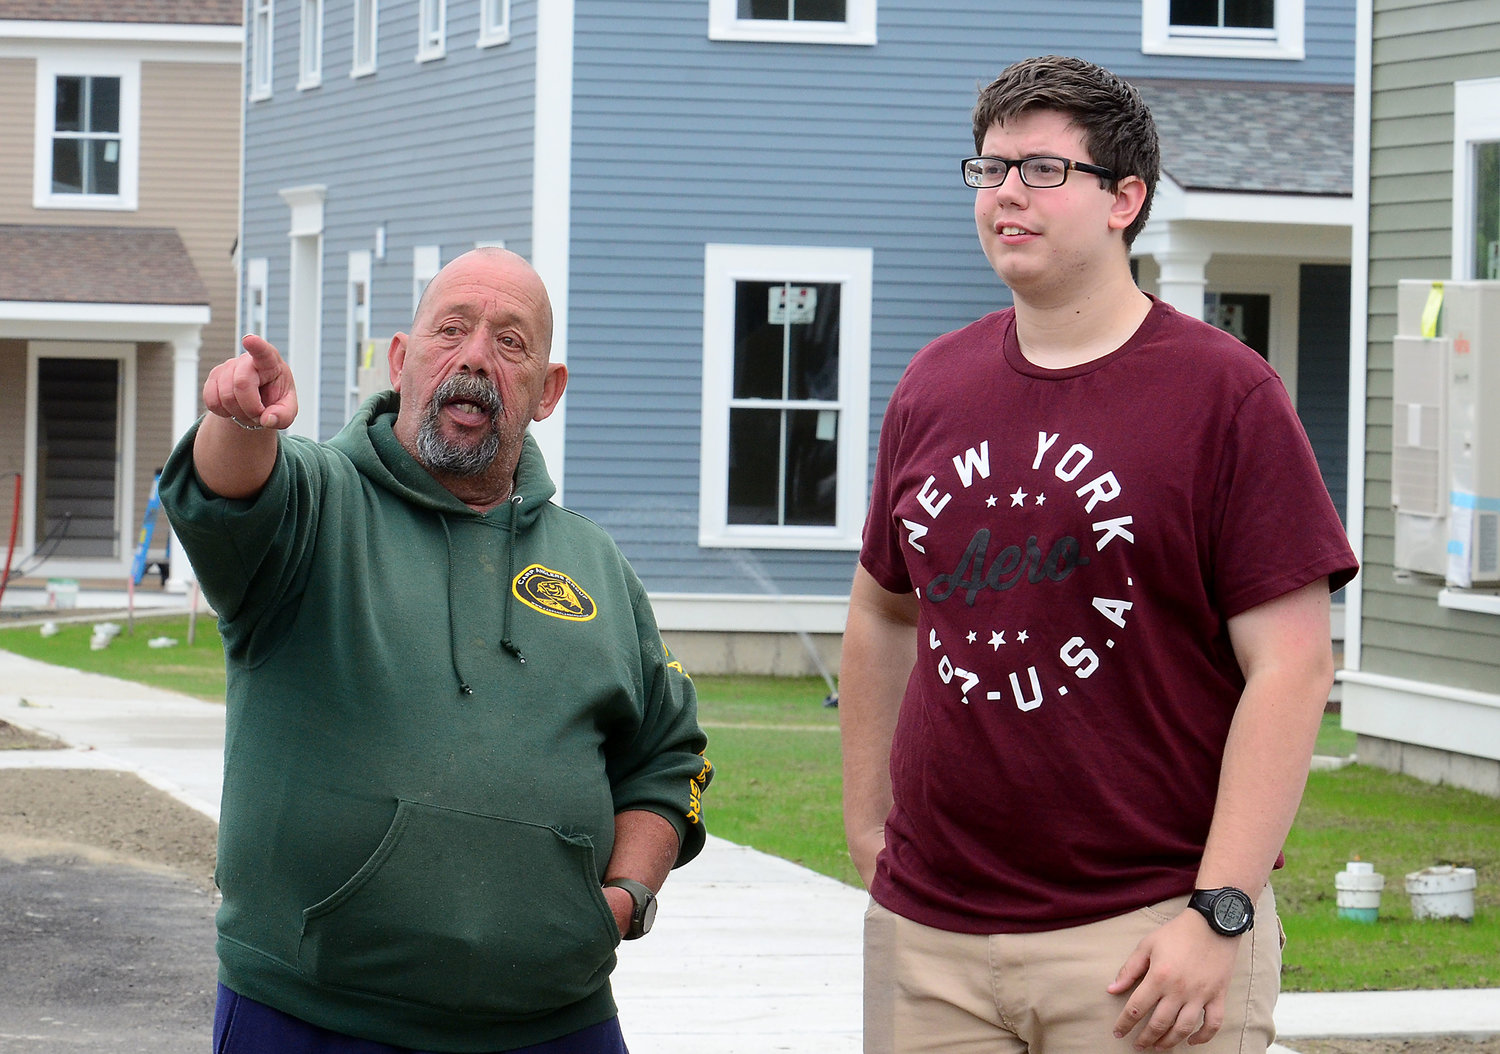 Tony Carvalho and his son David, 18, check out apartments during Palmer Pointe's open house last Friday. 
Mr. Carvalho, a Seekonk resident, is moving into a two-bedroom unit. "I'm very excited. They look fantastic," Mr. Carvalho said. "I'm trying to figure out which unit it is so I can figure out the furniture and space."